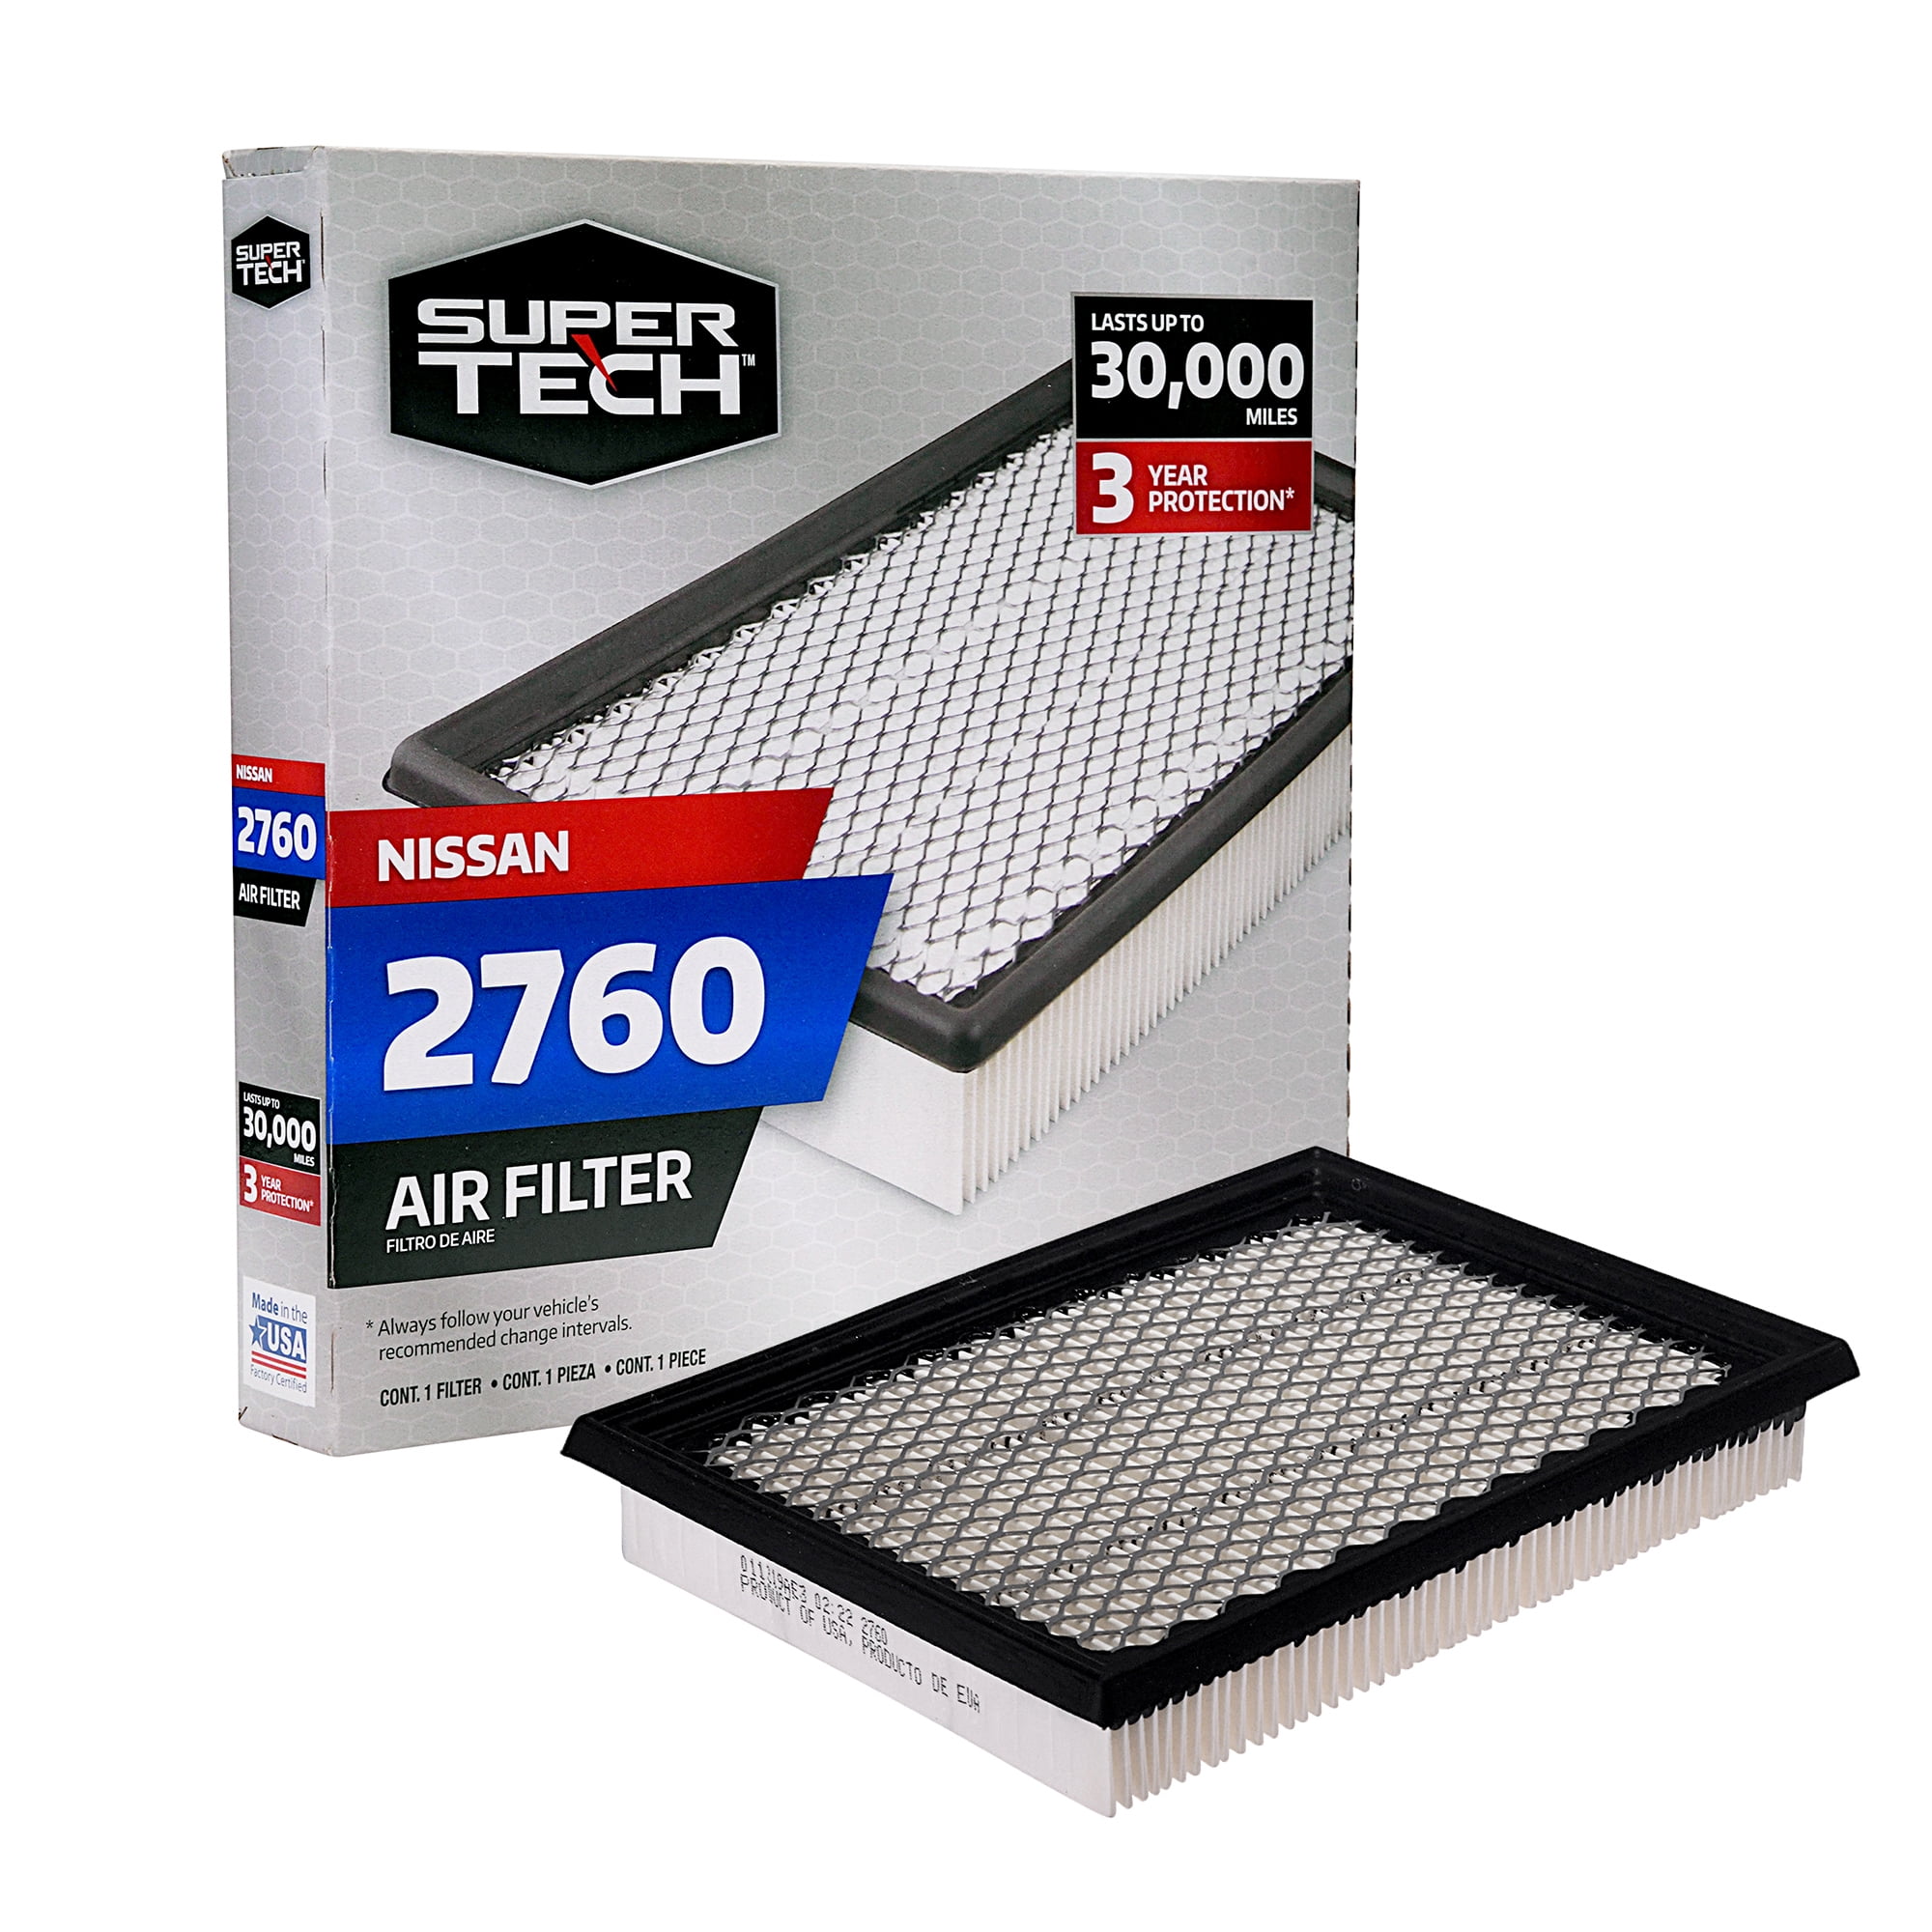 Super Tech 2760 Engine Air Filter, Replacement Filter for Nissan